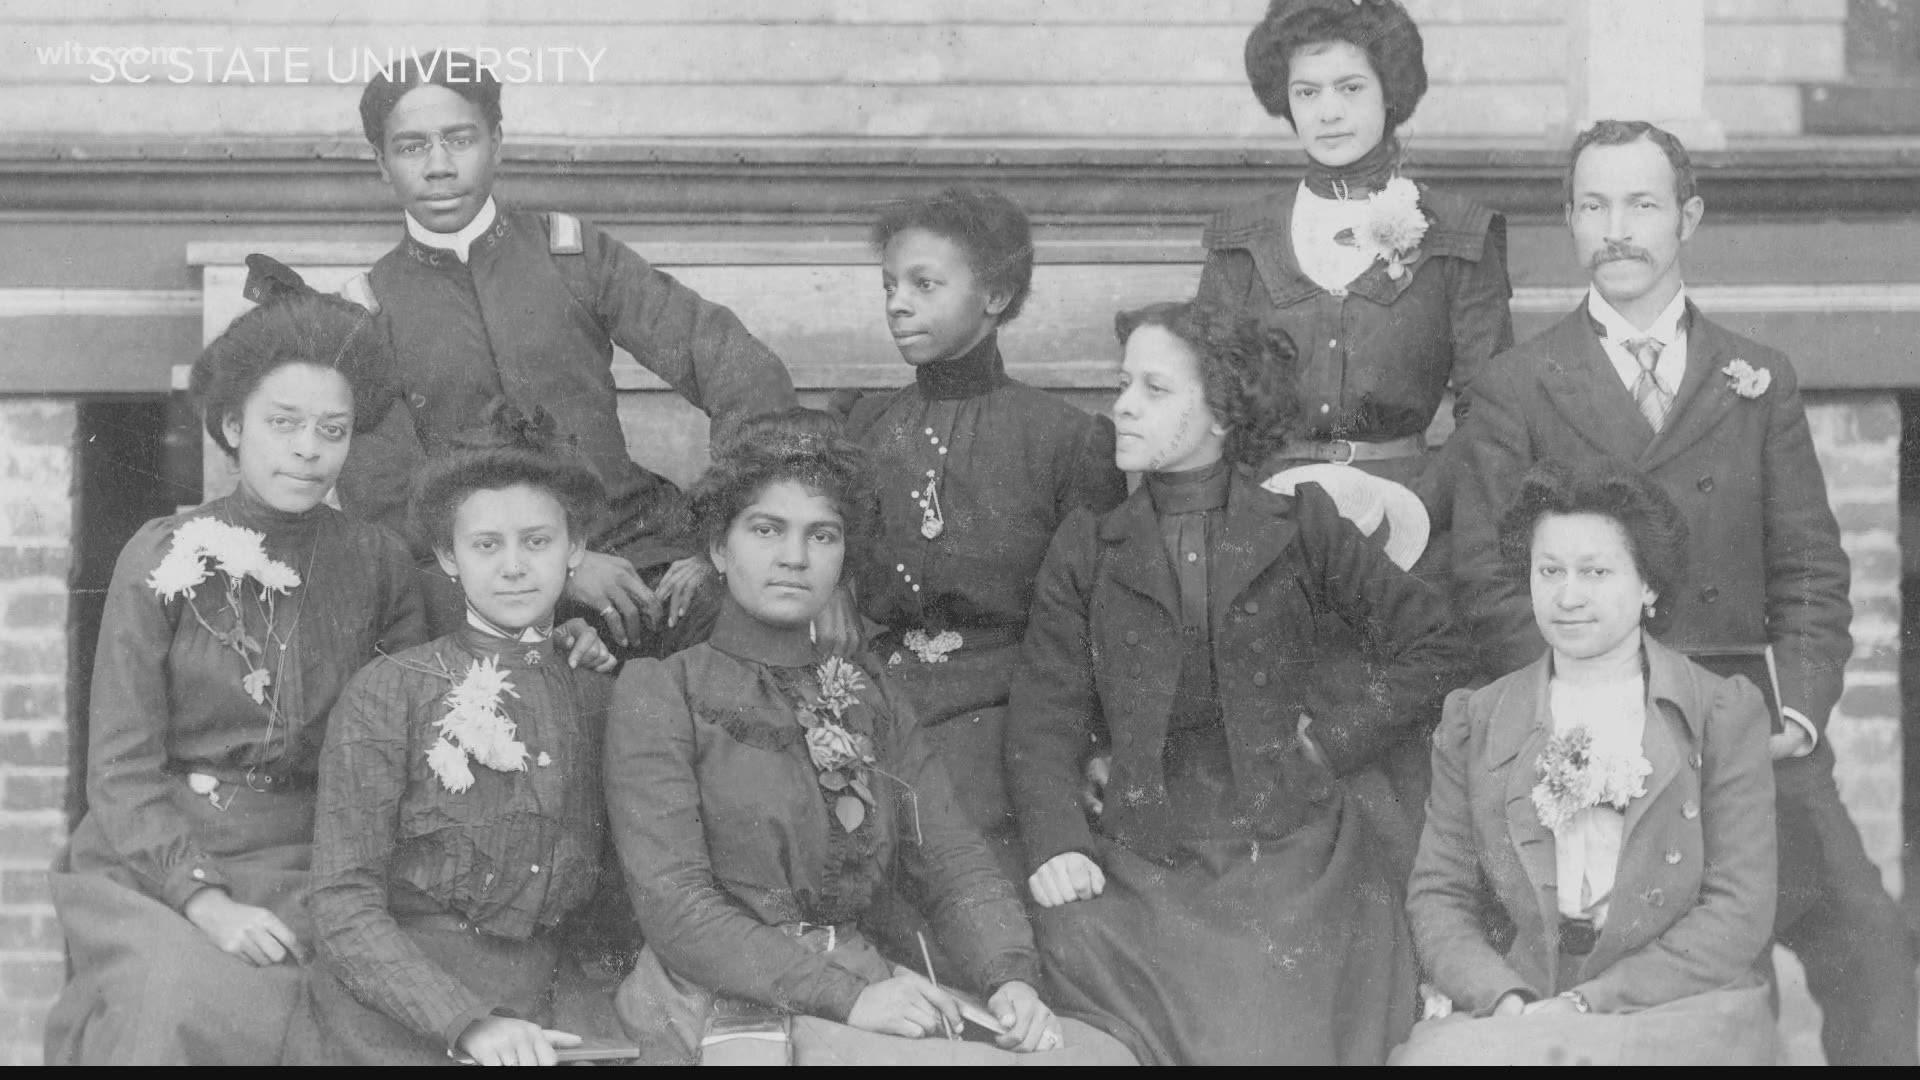 The university opened its doors on March 4, 1896 as the state's sole public college for African-American students.